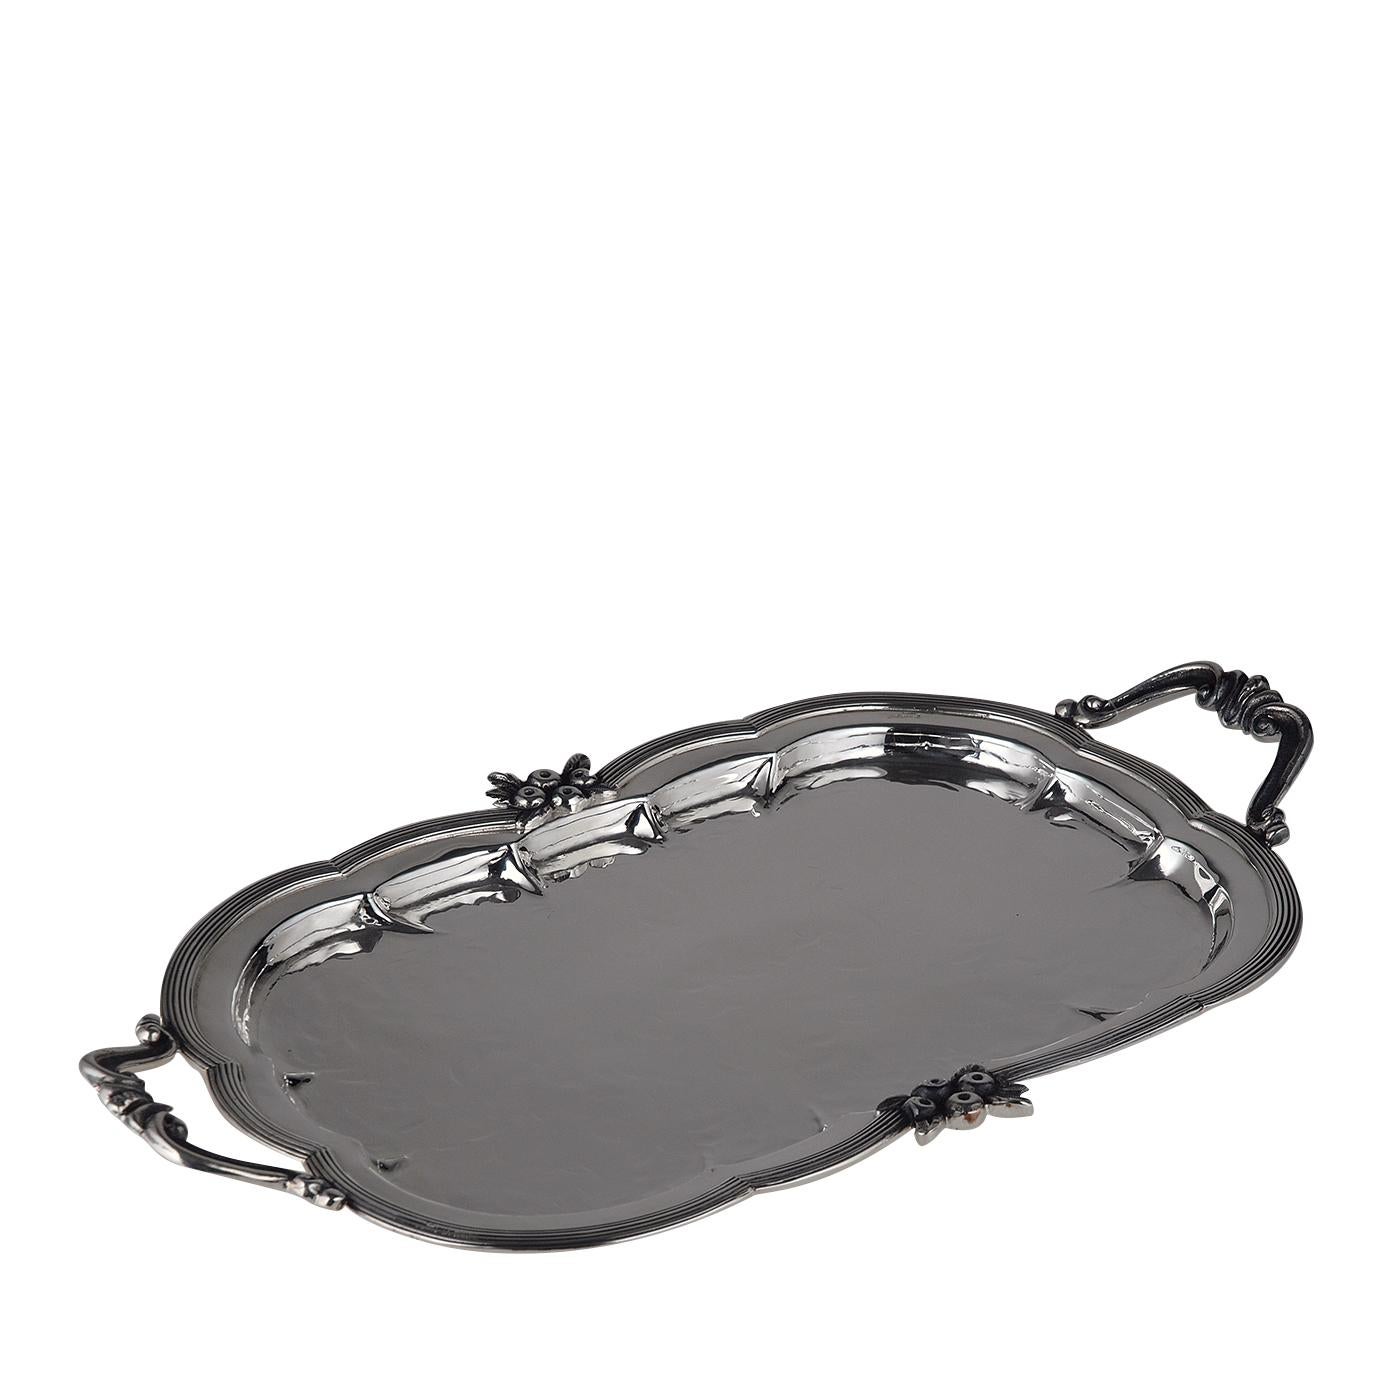 This elegant tray will enrich a table and can be also used as a permanent decorative addition to a console or a coffee table to complement a Classic decor. Its shape with round corners is adorned inside with gentle semi-circular dents, while the